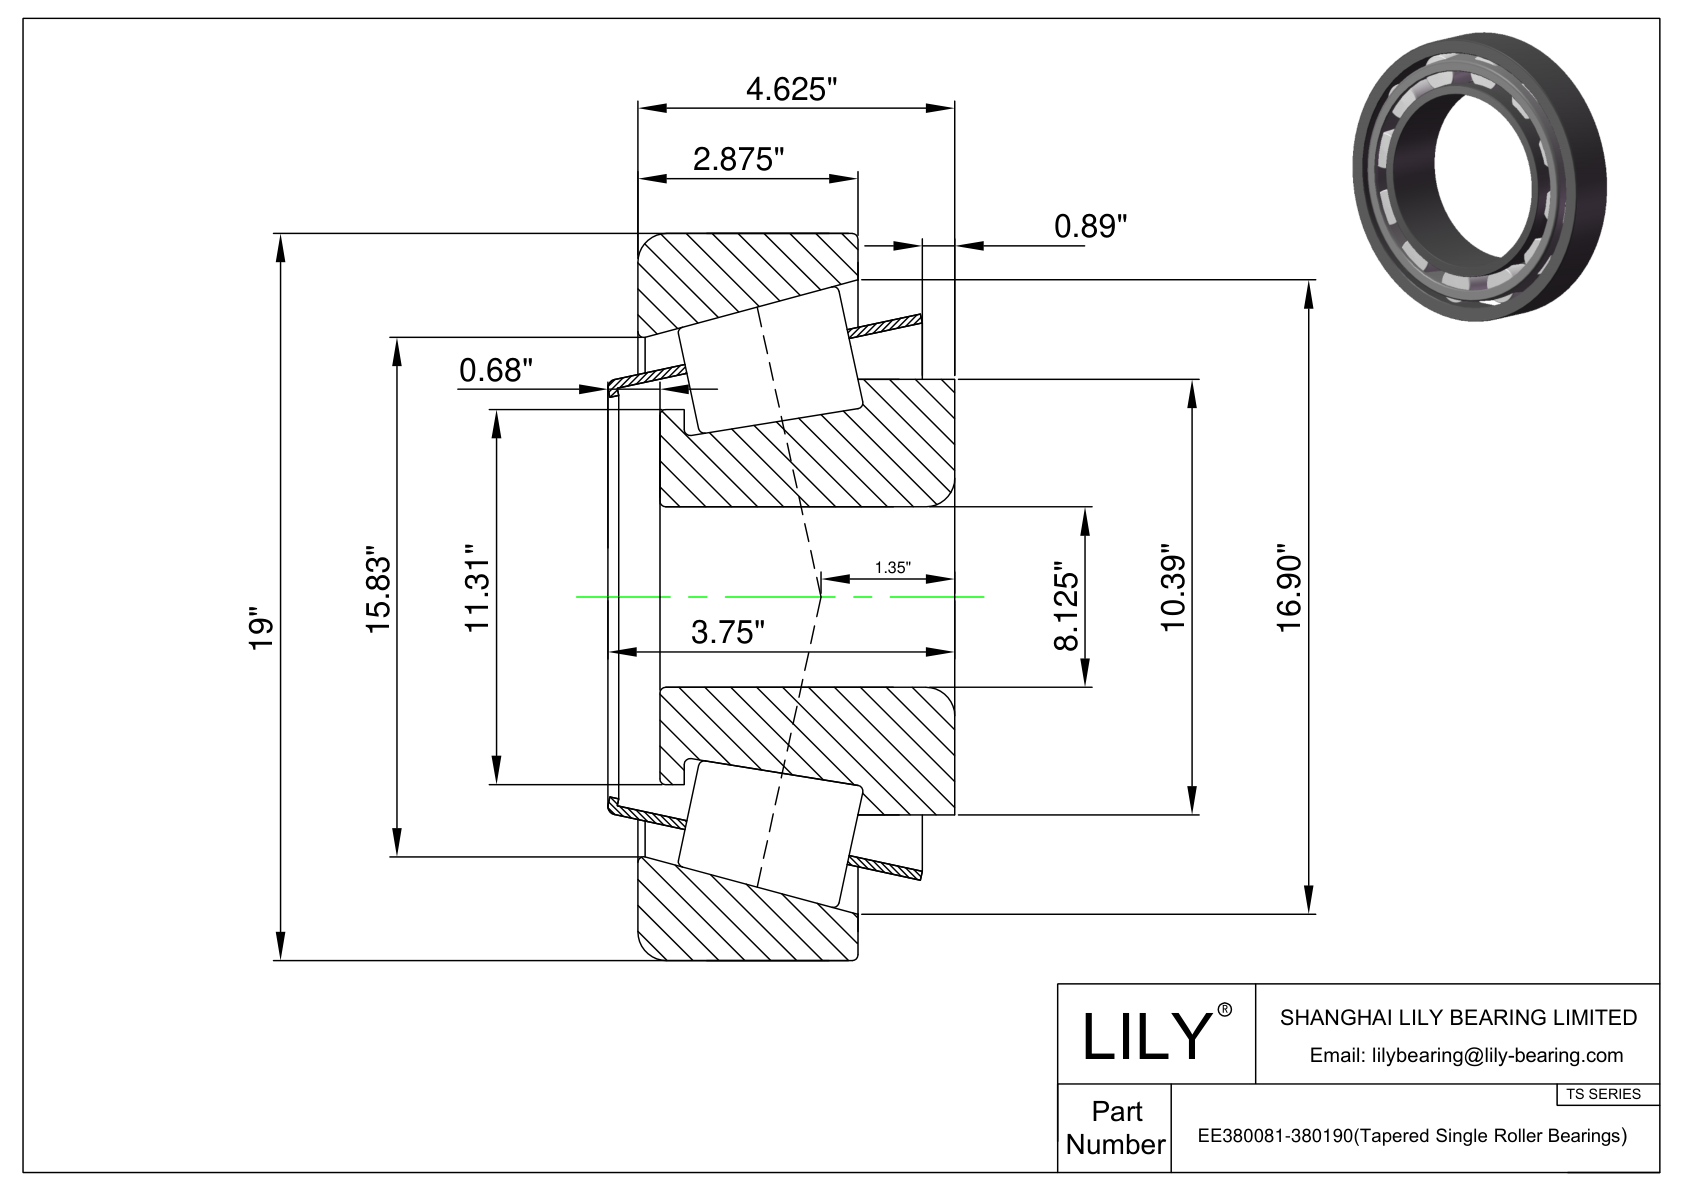 EE380081-380190 TS (Tapered Single Roller Bearings) (Imperial) cad drawing